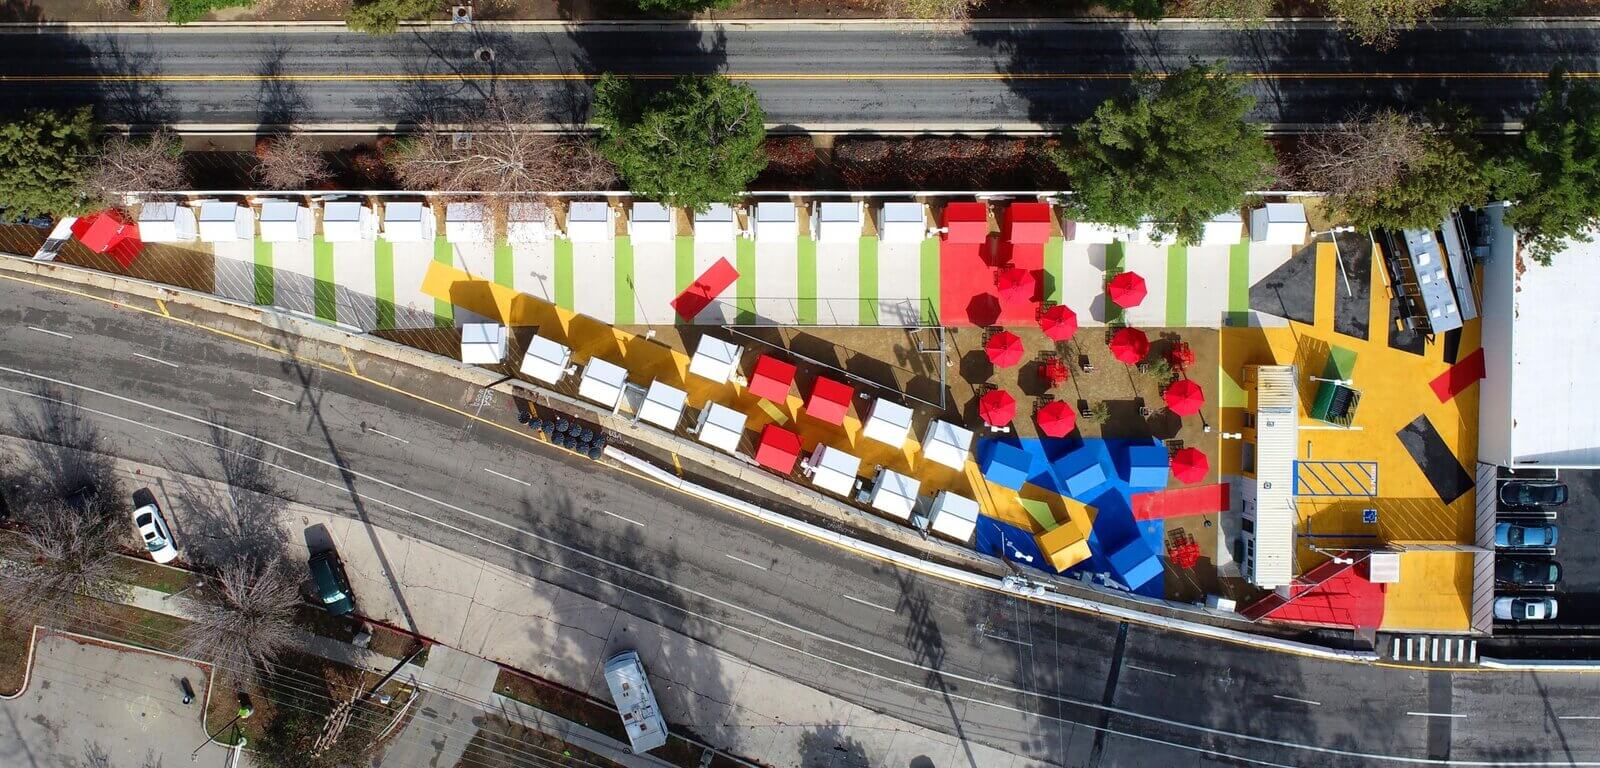 aerial view of brightly colored tiny house community